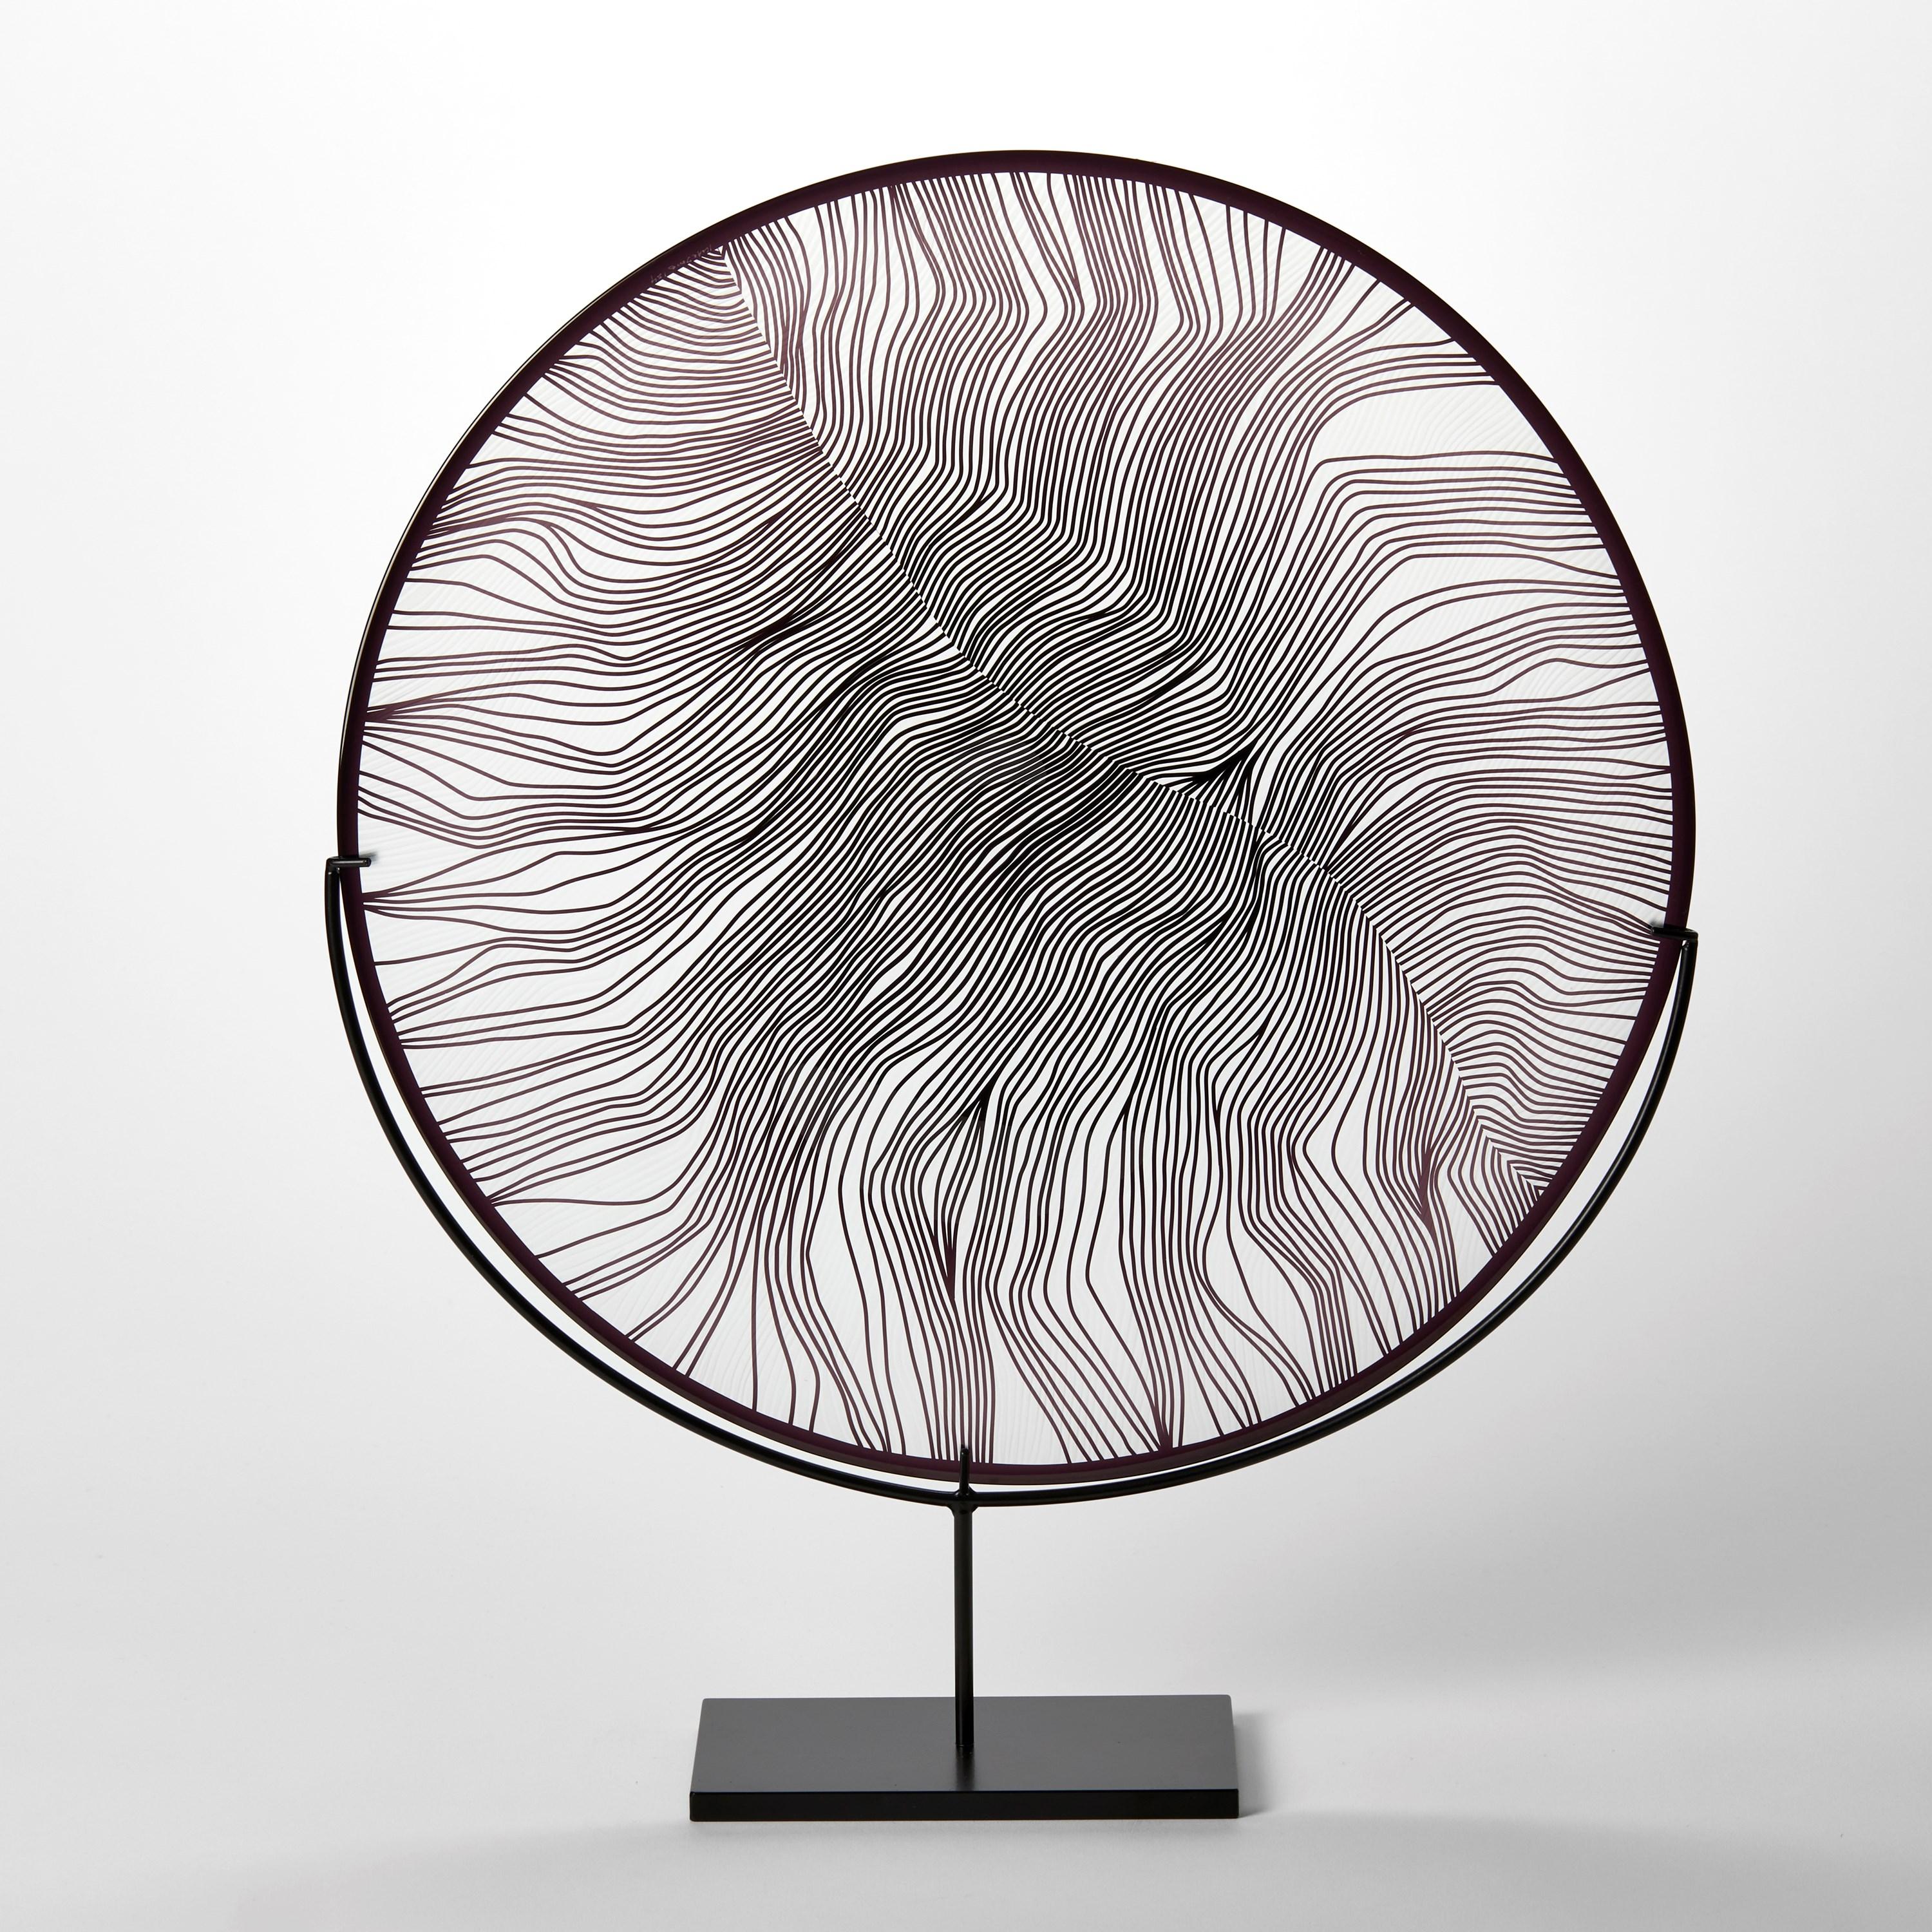 'Solar Storm Monochrome IV' is a unique handblown and cut glass artwork by the British artist, Kate Jones of Gillies Jones.

Created with Stephen Gillies, with whom Jones makes many works in collaboration, these exquisite sculptural plates are